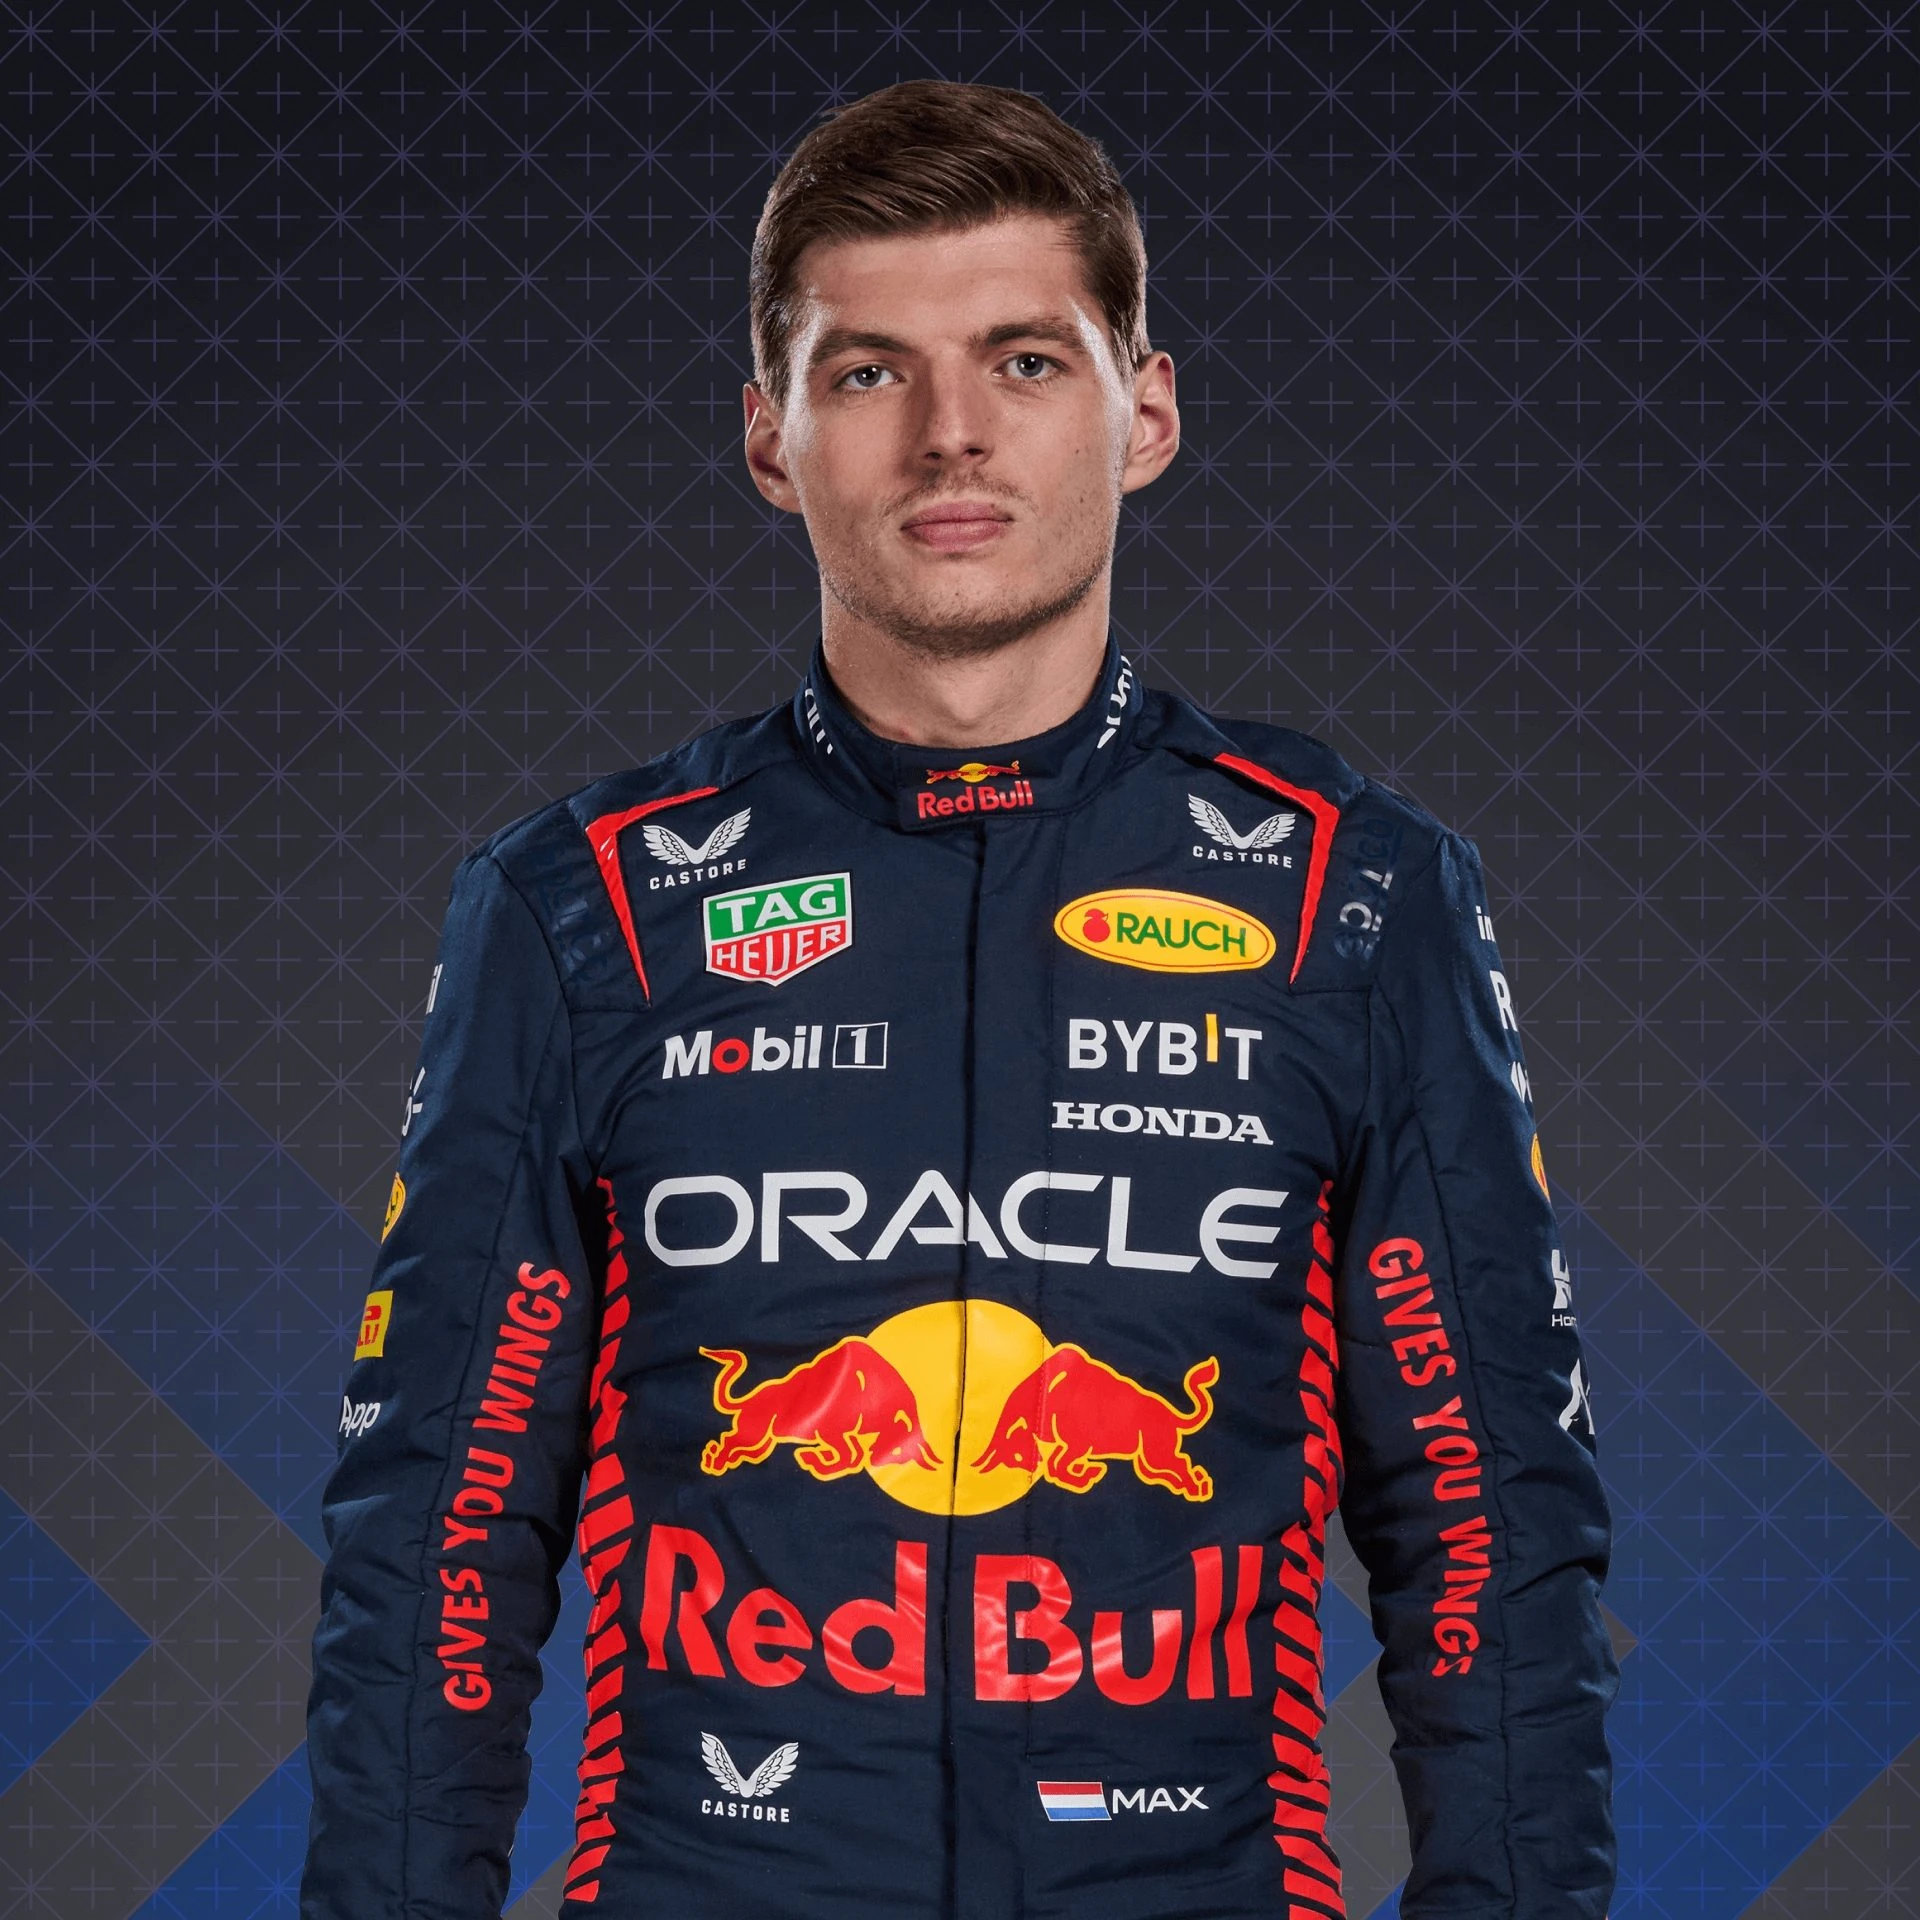 Avatar of an F1 racing driver in a Red Bull racing suit against a patterned background, representing sports and high-speed motorsport competition.